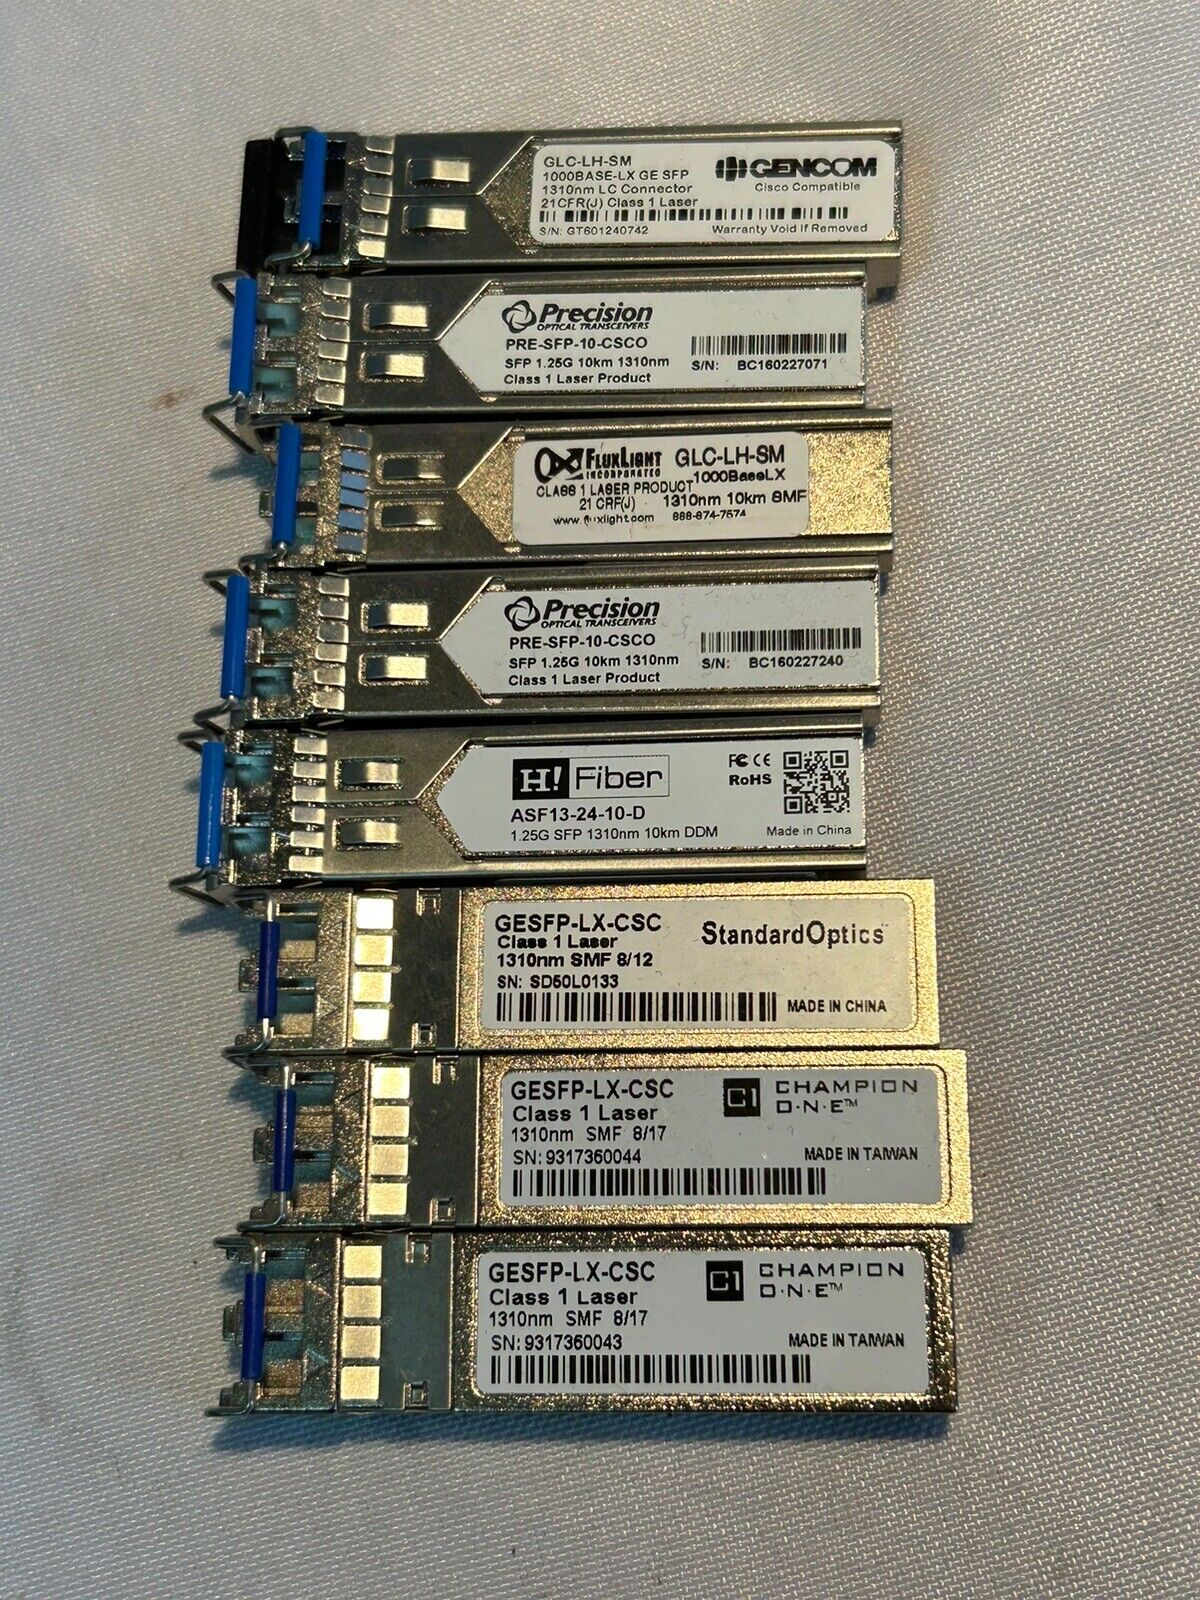 3rd Party GLC-LH-SM Cisco Compatible SFP, GE LX/LH Lot Of 8x